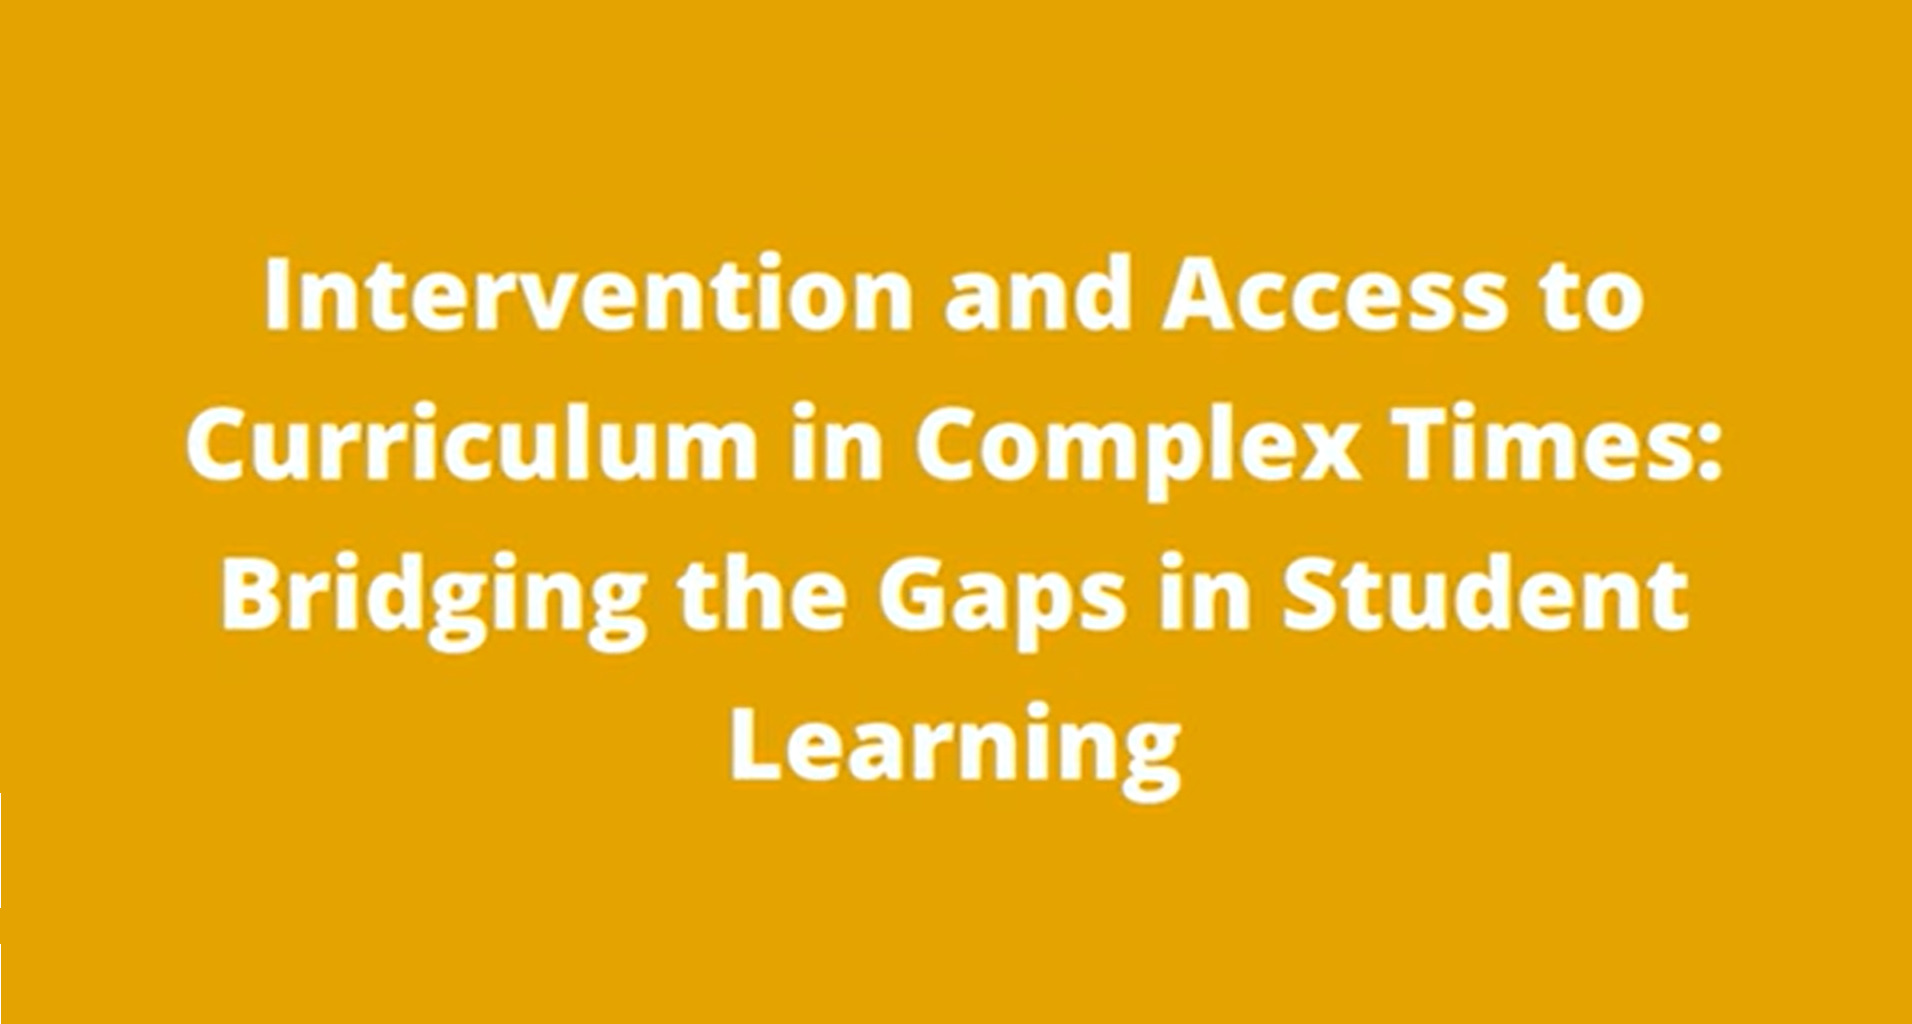 Intervention and Access to Curriculum in Complex Times: Bridging the Gaps in Student Learning